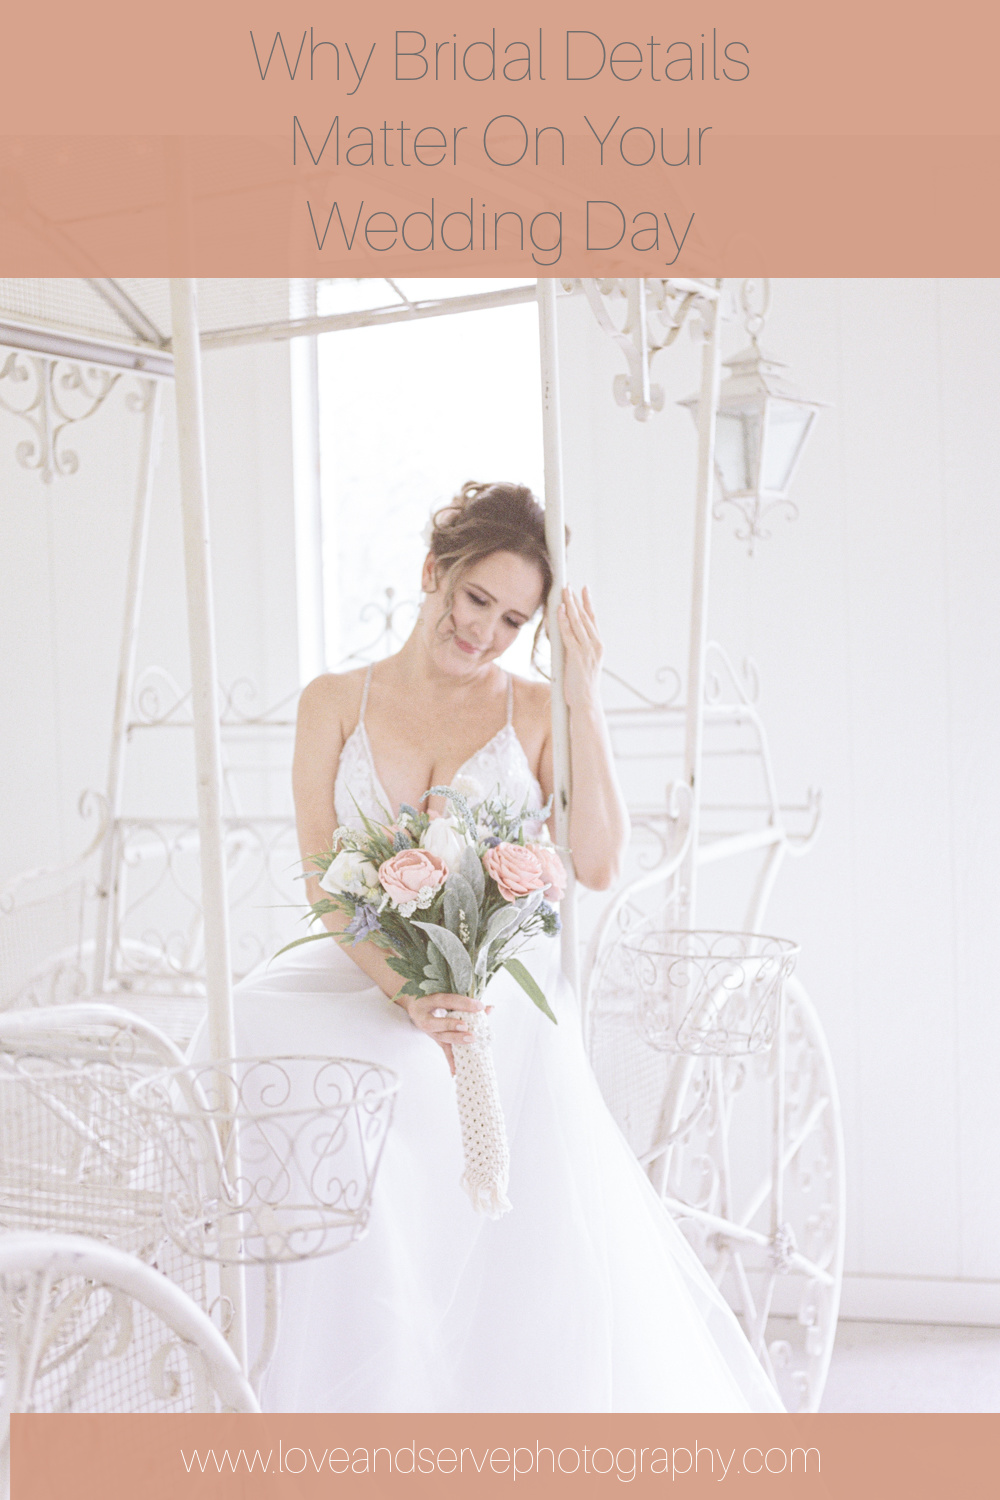 The Importance of Wedding Day Details